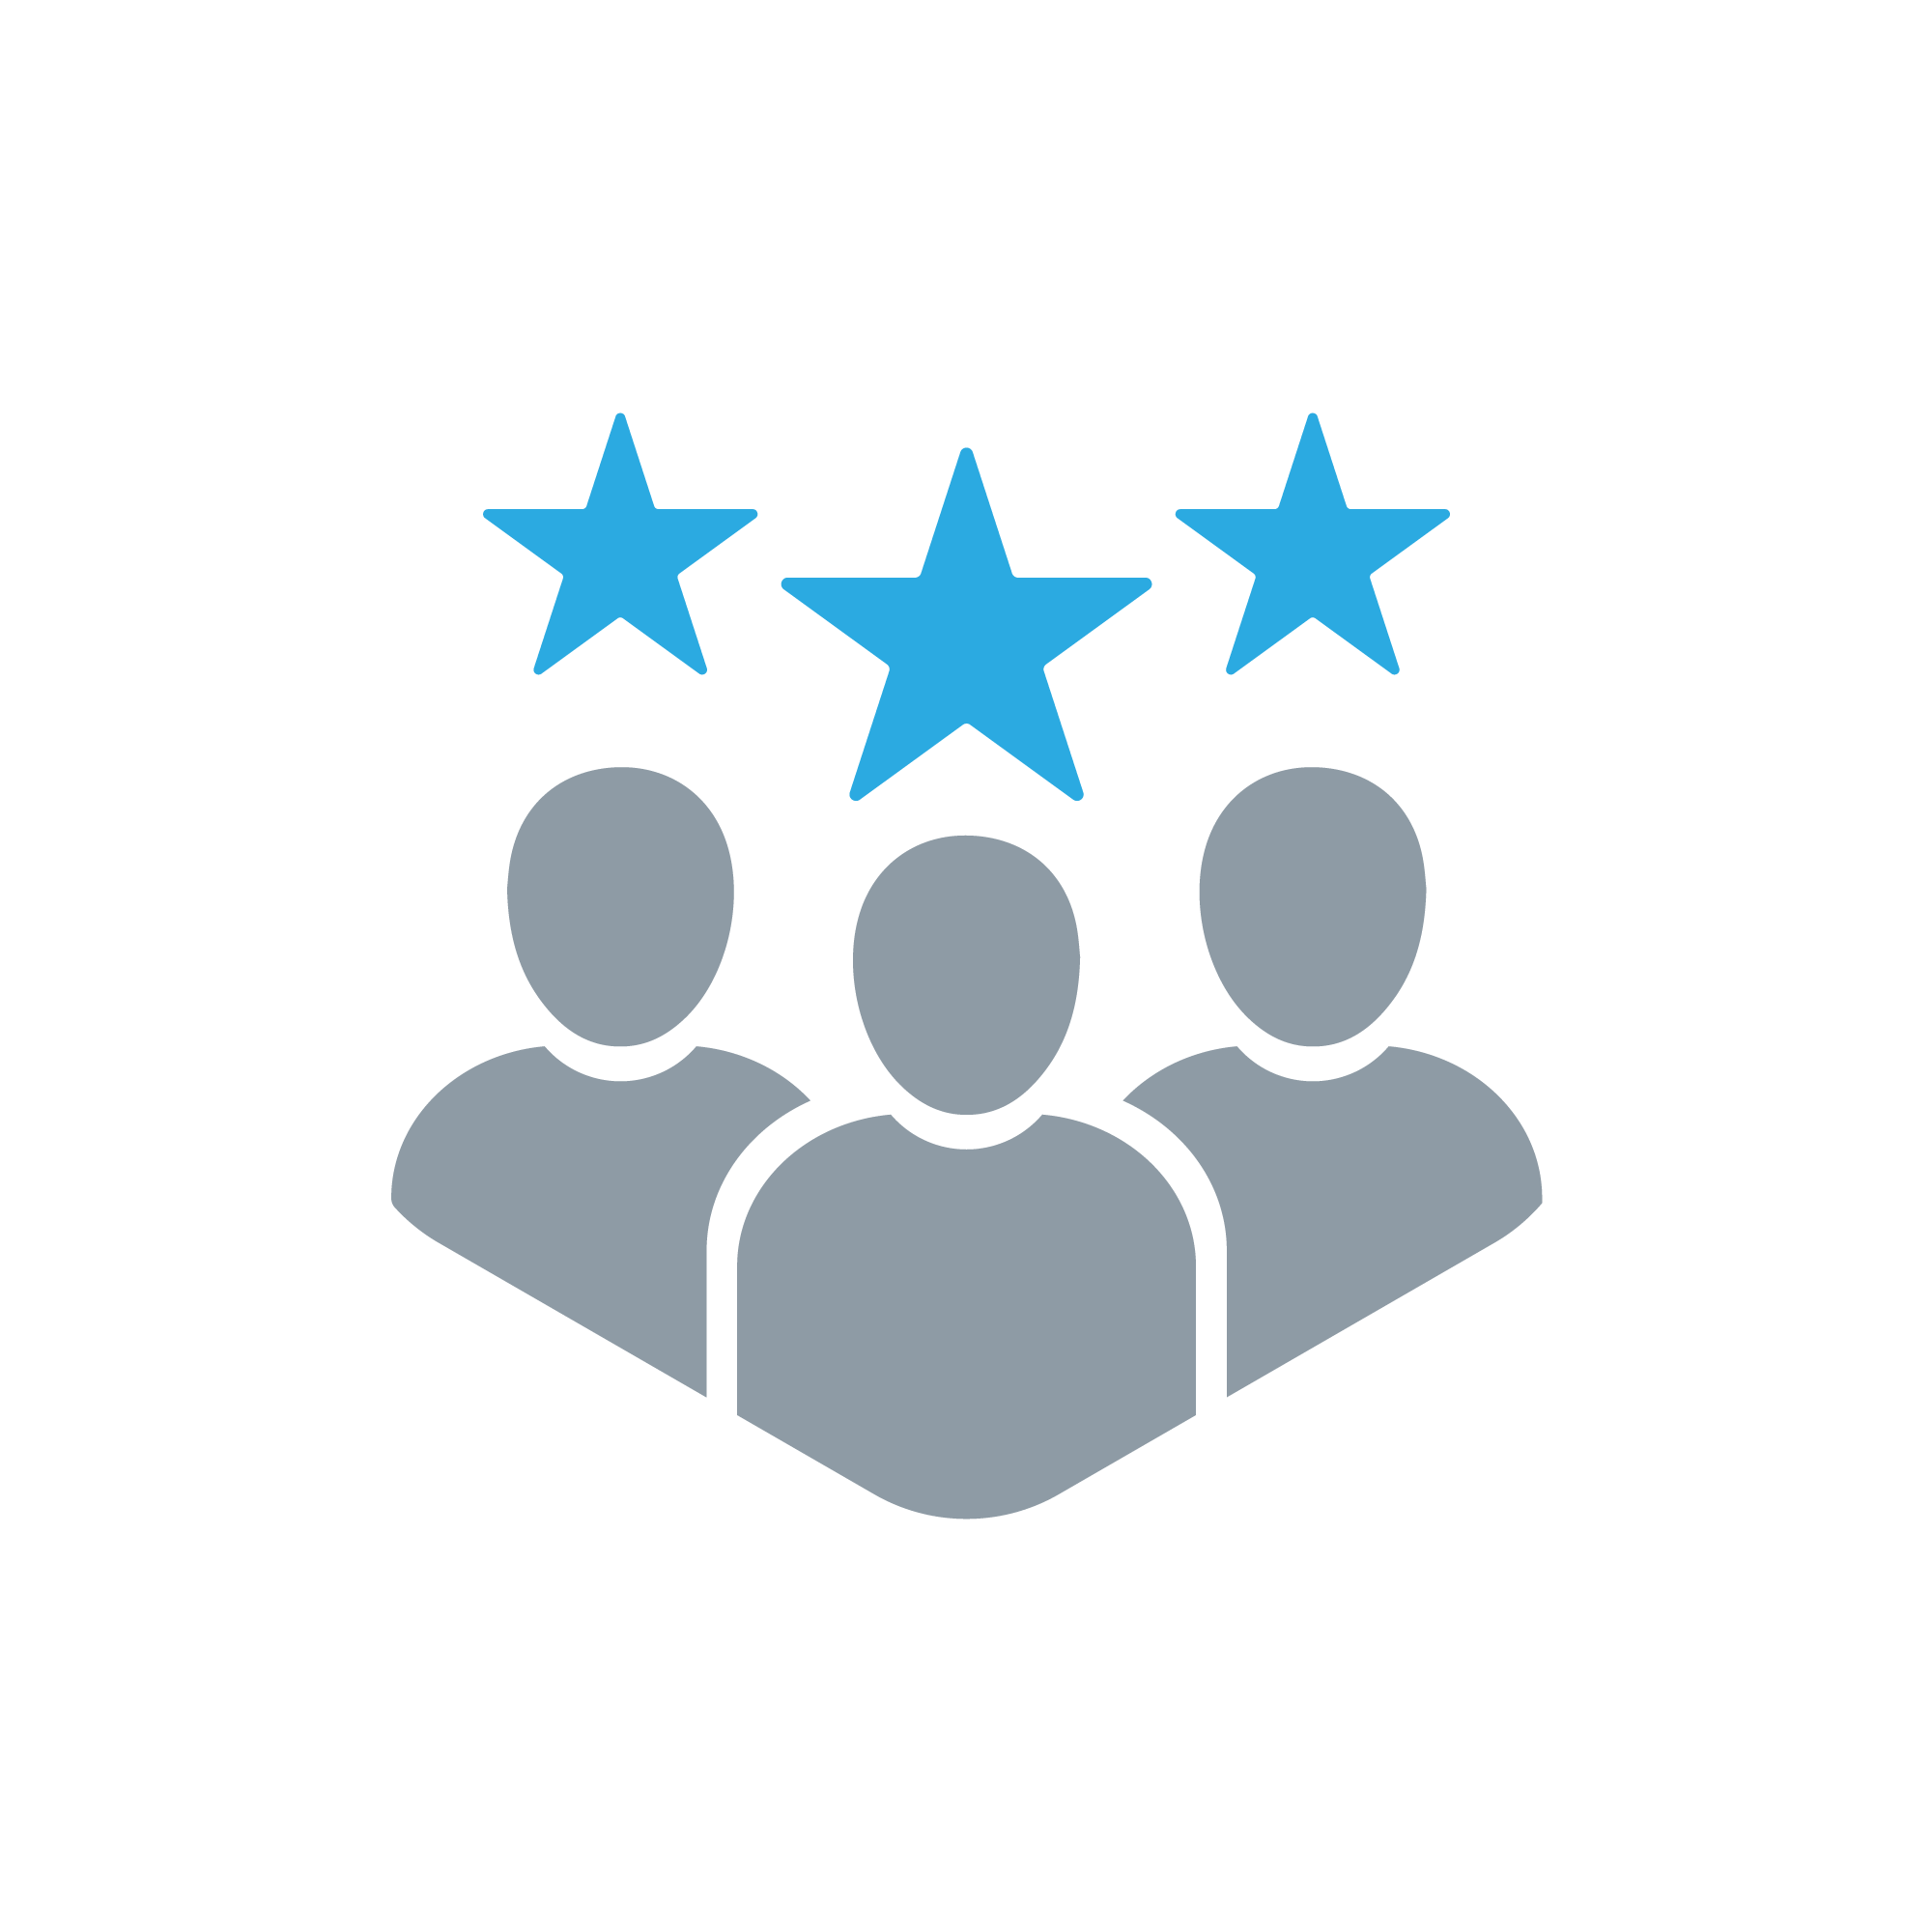  service icon - customers with stars above their heads